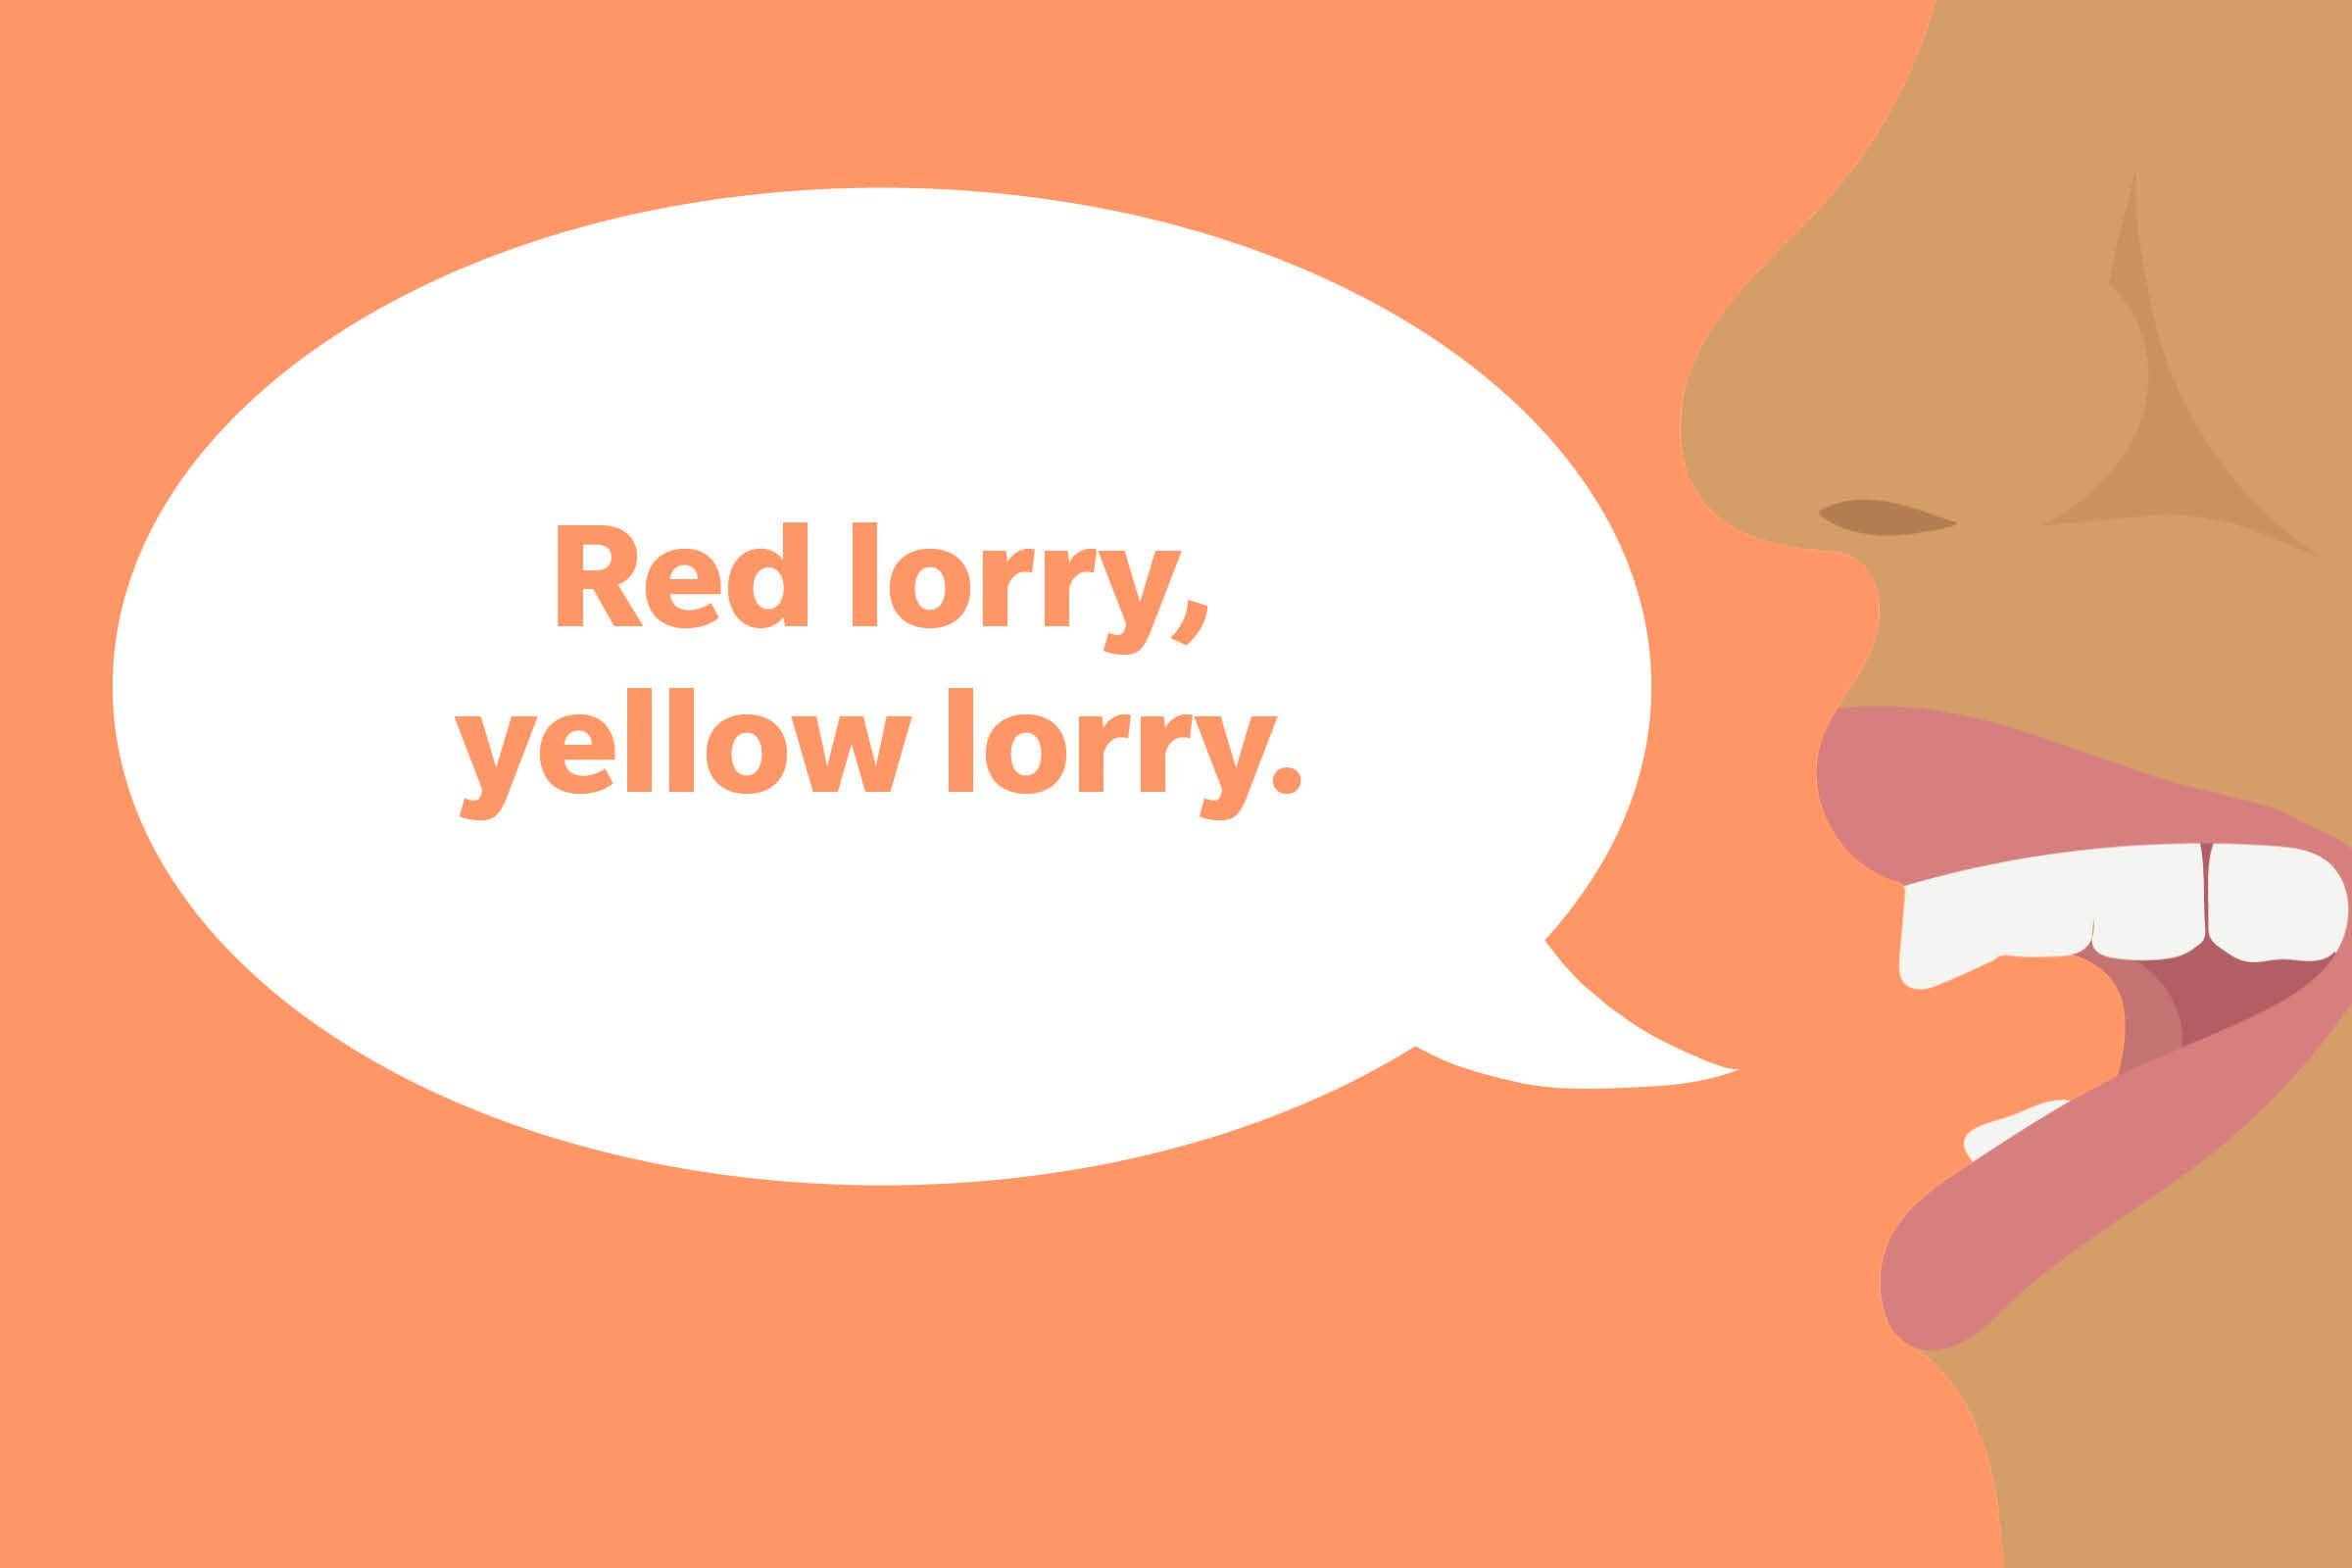 Tongue Twister: Red lorry, yellow lorry.